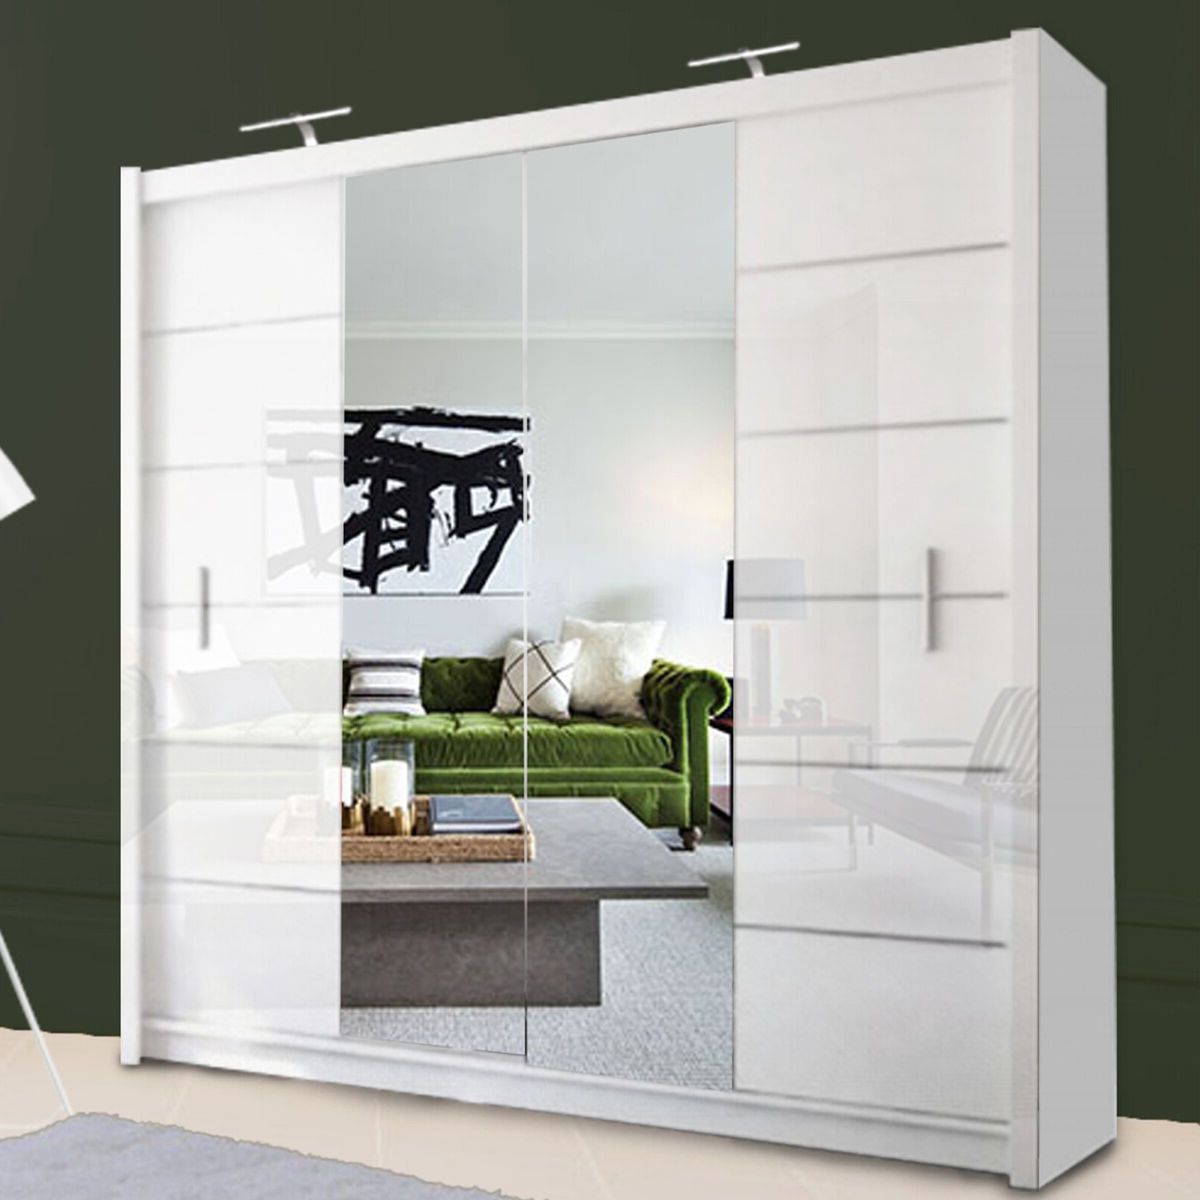 Modern Double Sliding Door Wardrobe Center Mirror Lisbon 2 Colours – 3  Sizes | Ebay Intended For Double Wardrobes With Mirror (Gallery 16 of 20)